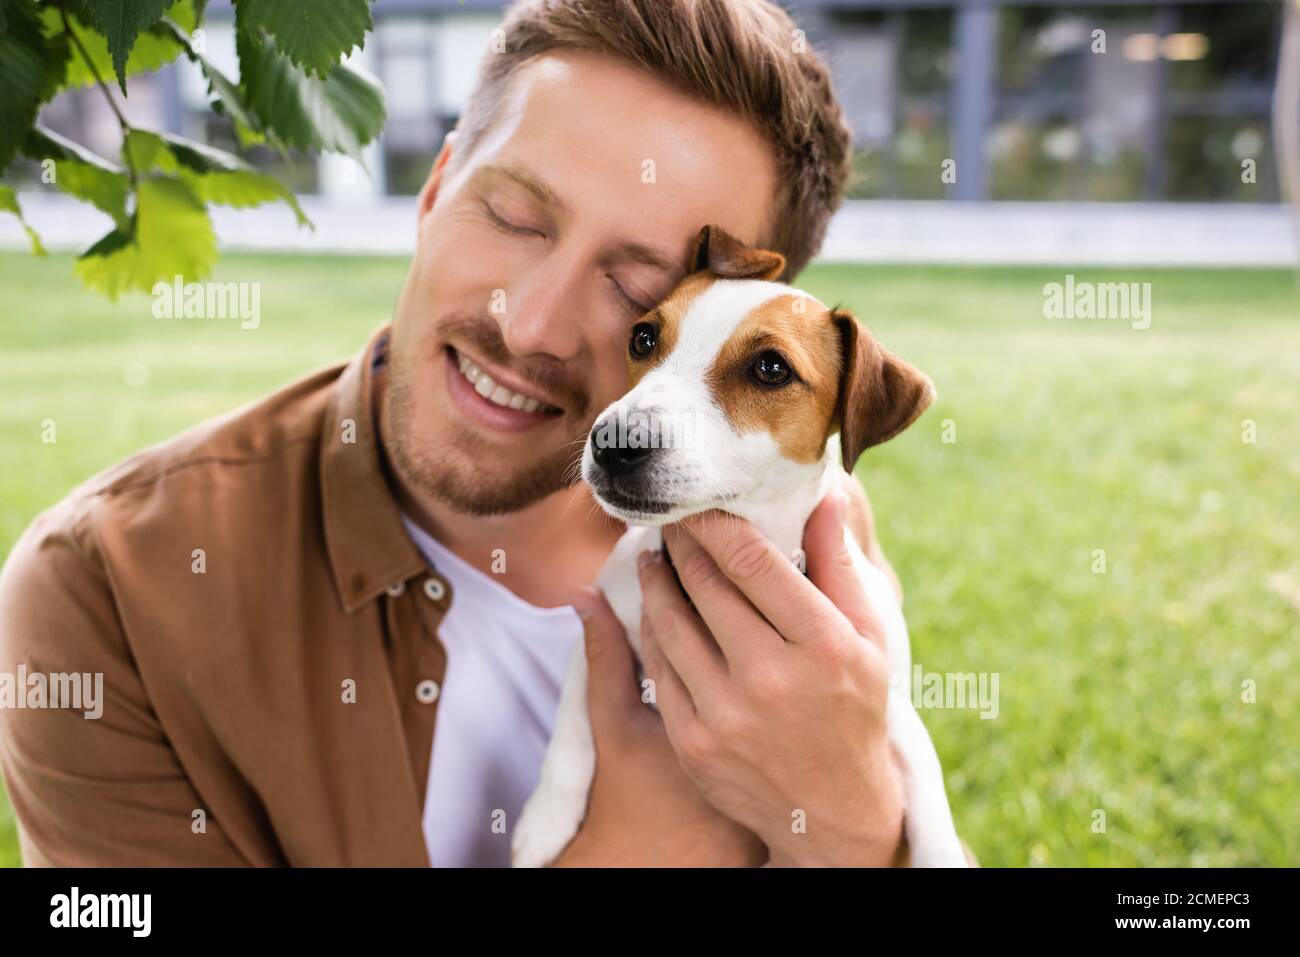 young man with closed eyes holding white jack russell terrier dog with brown spots on head Stock Photo